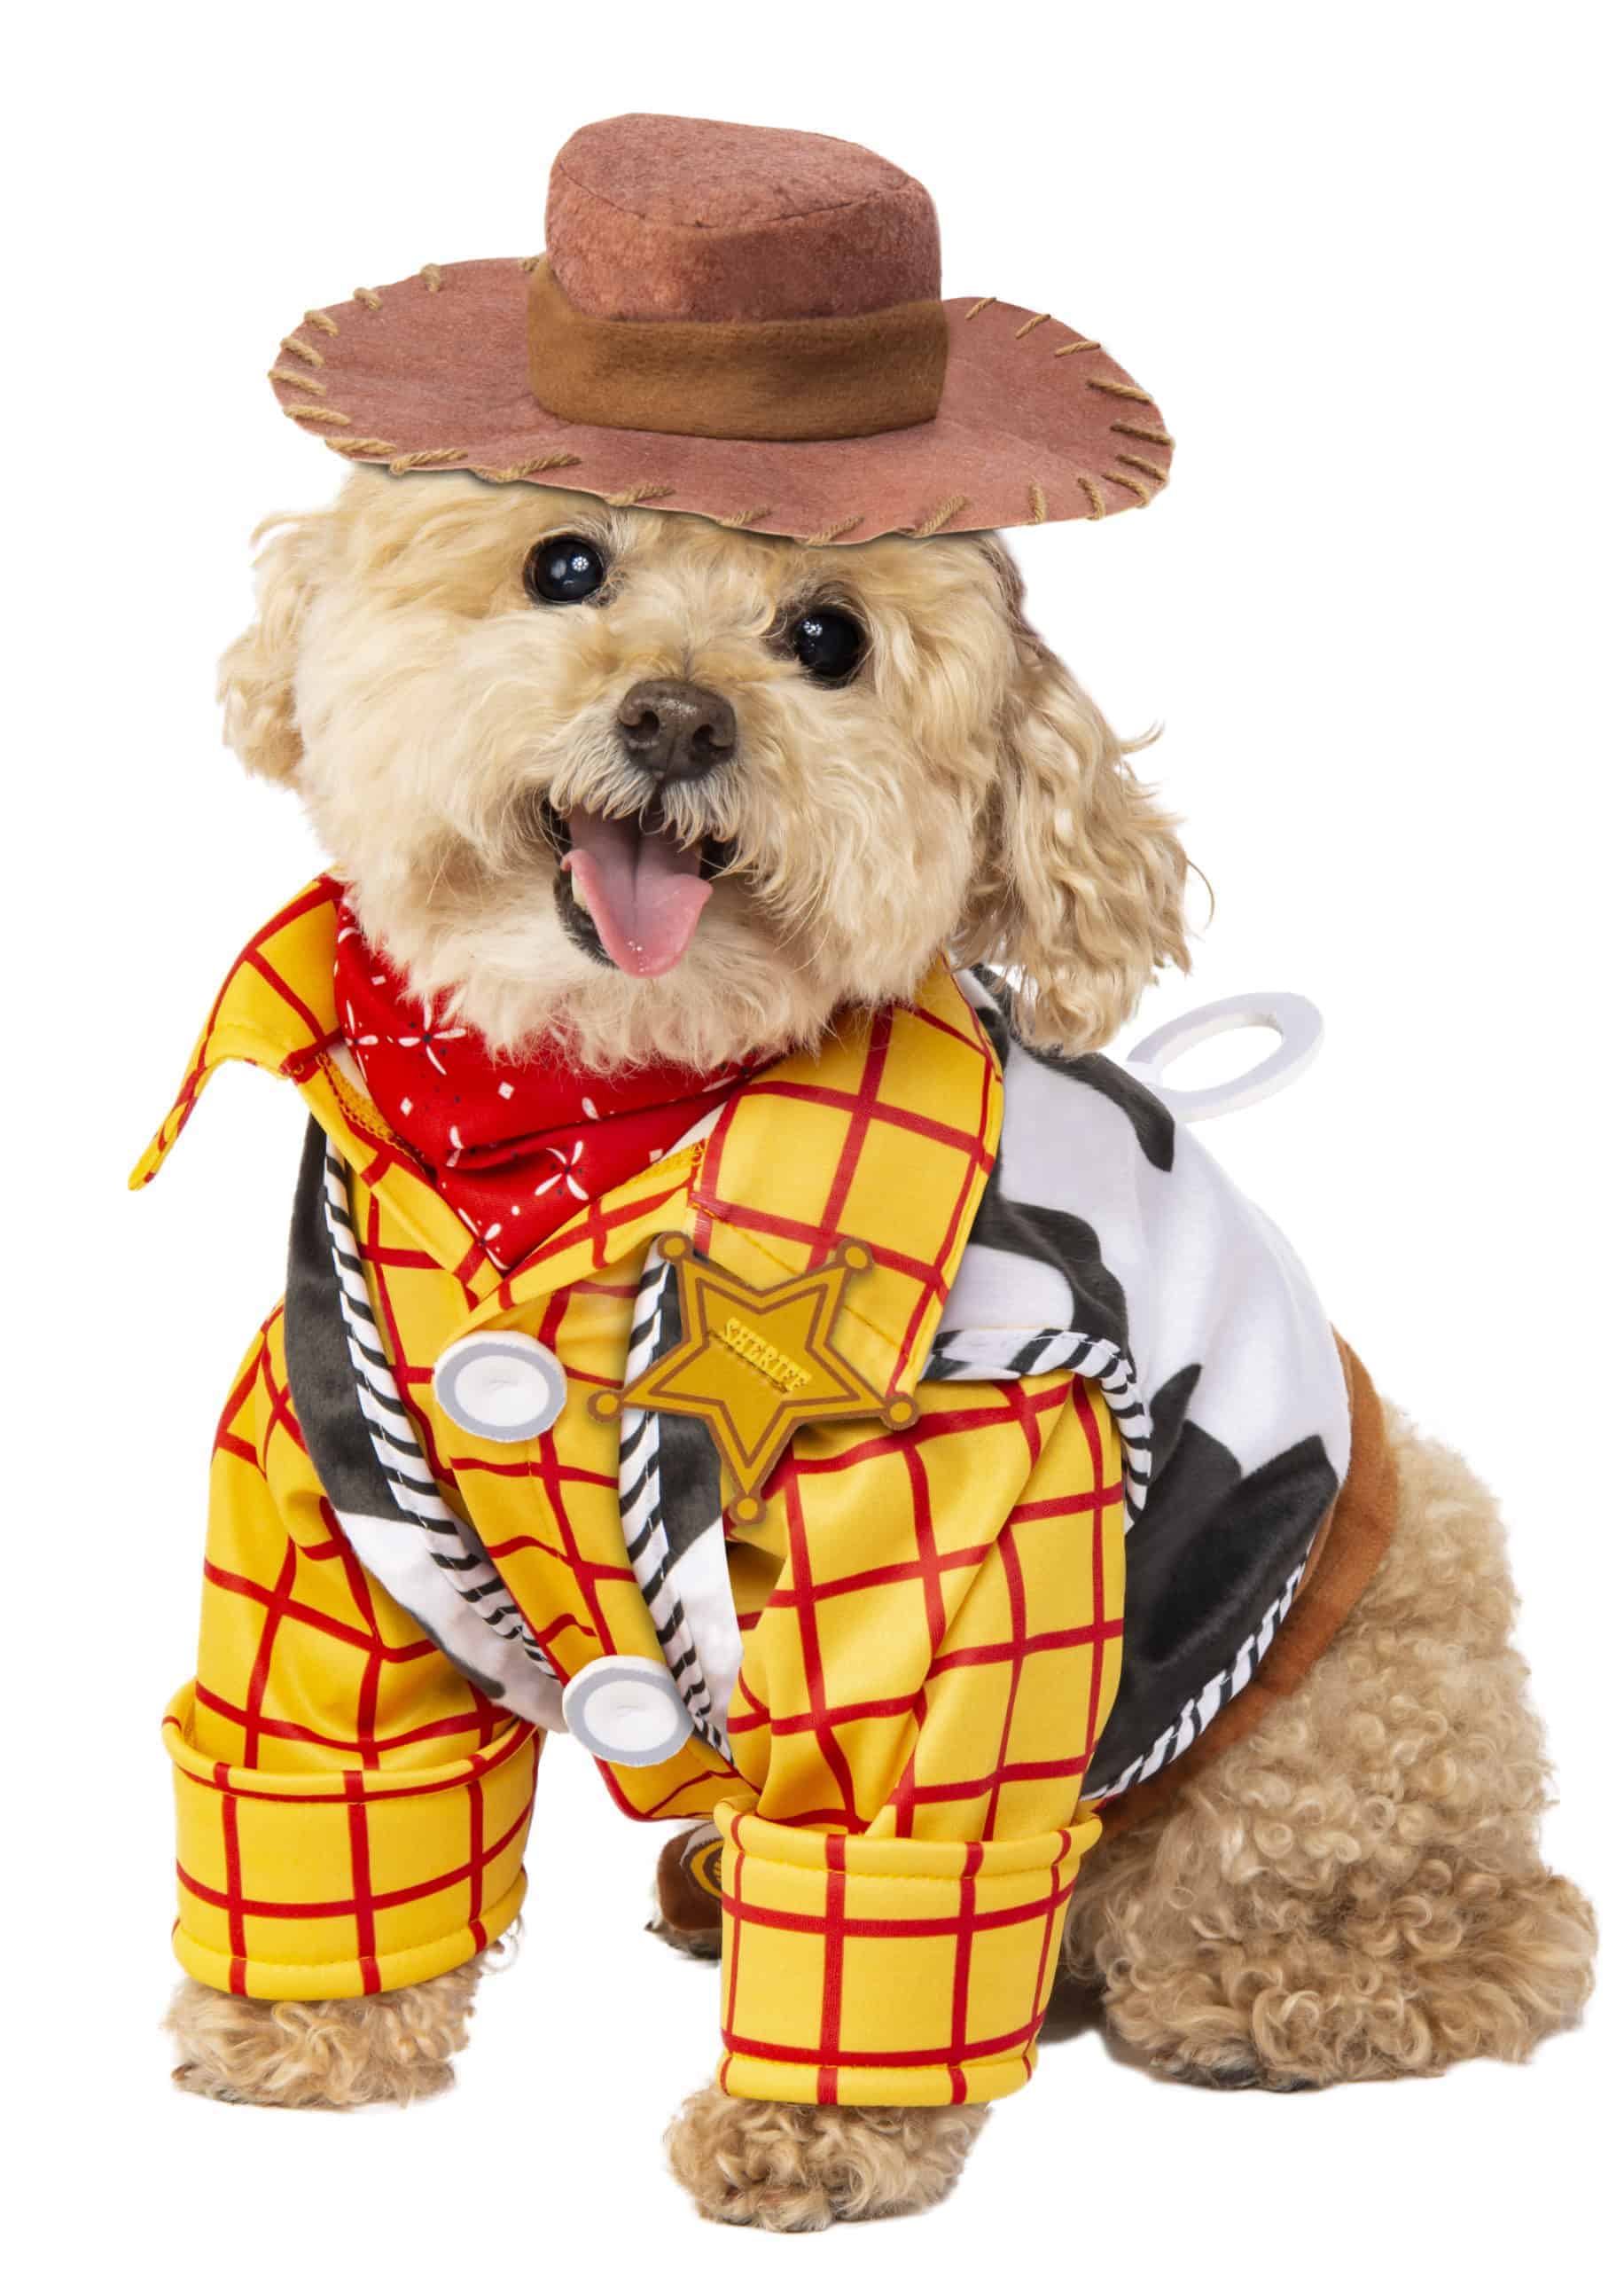 BOOTIQUE "COWBOY" OUTFIT AND HAT Puppy/Dog  XLARGE 